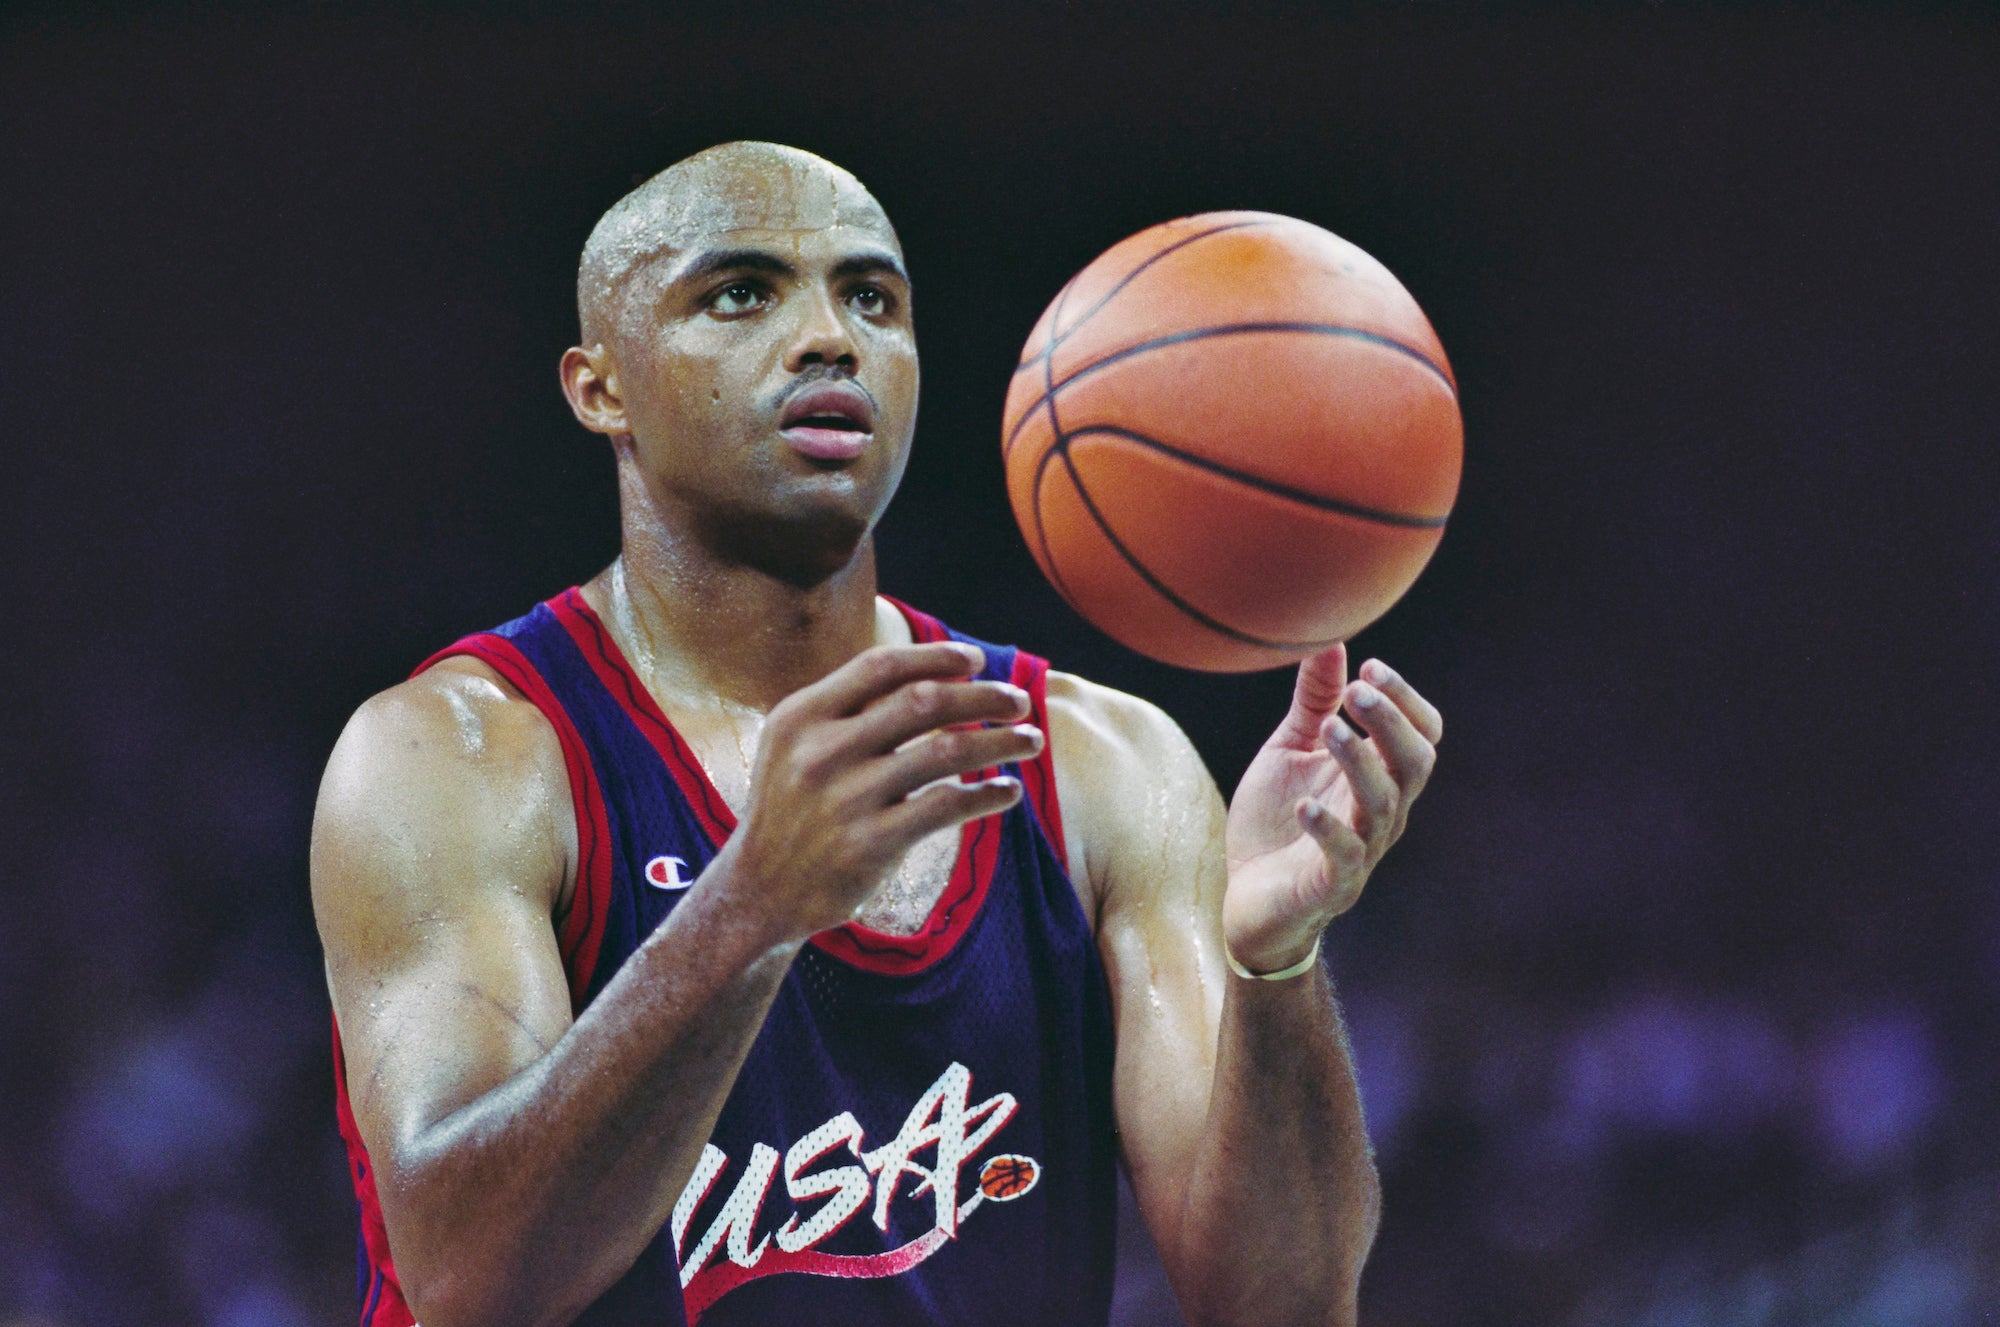 New Charles Barkley Biography Revisits the Night the NBA Legend